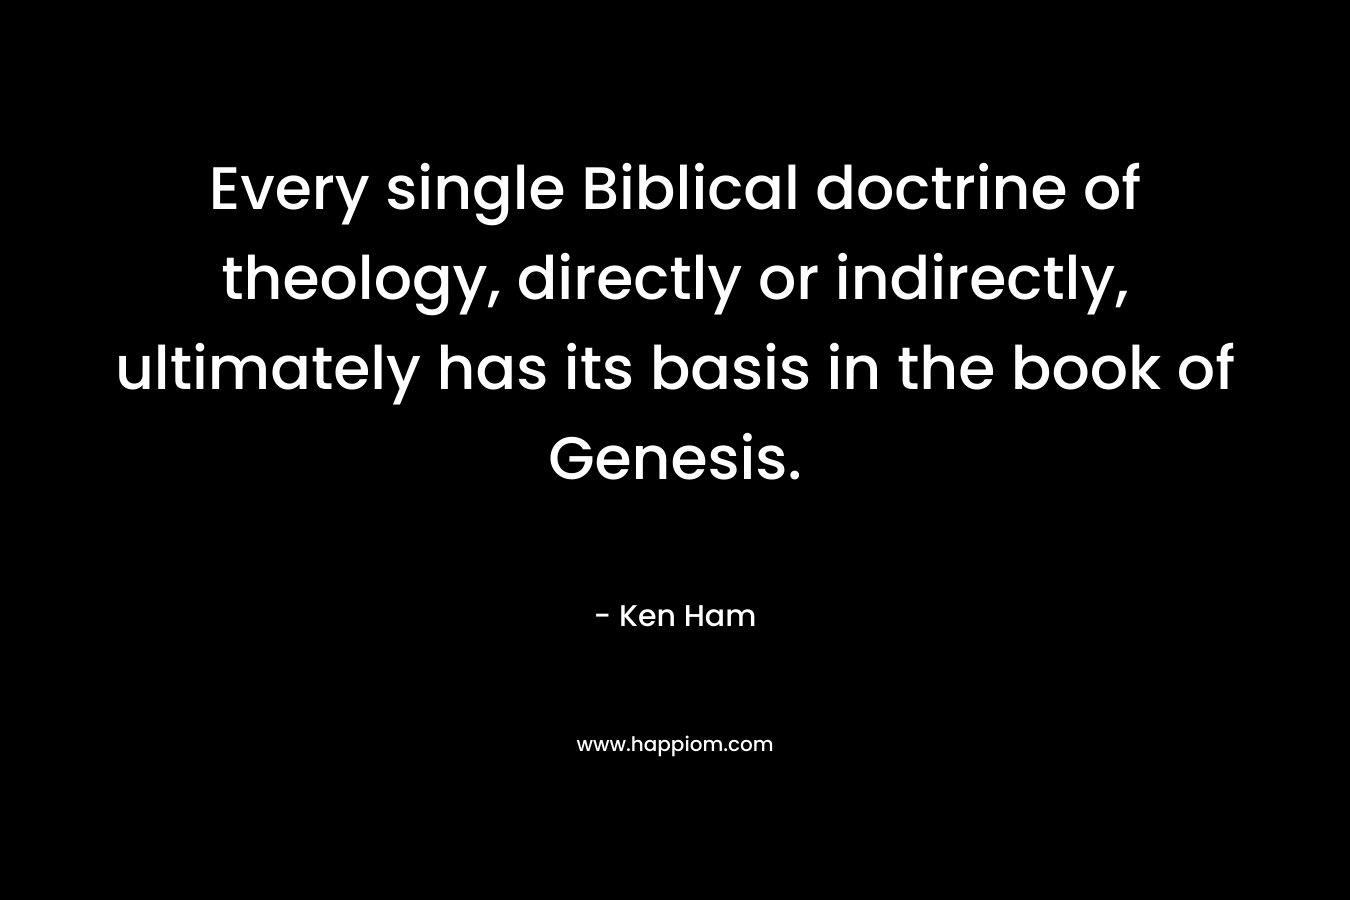 Every single Biblical doctrine of theology, directly or indirectly, ultimately has its basis in the book of Genesis.